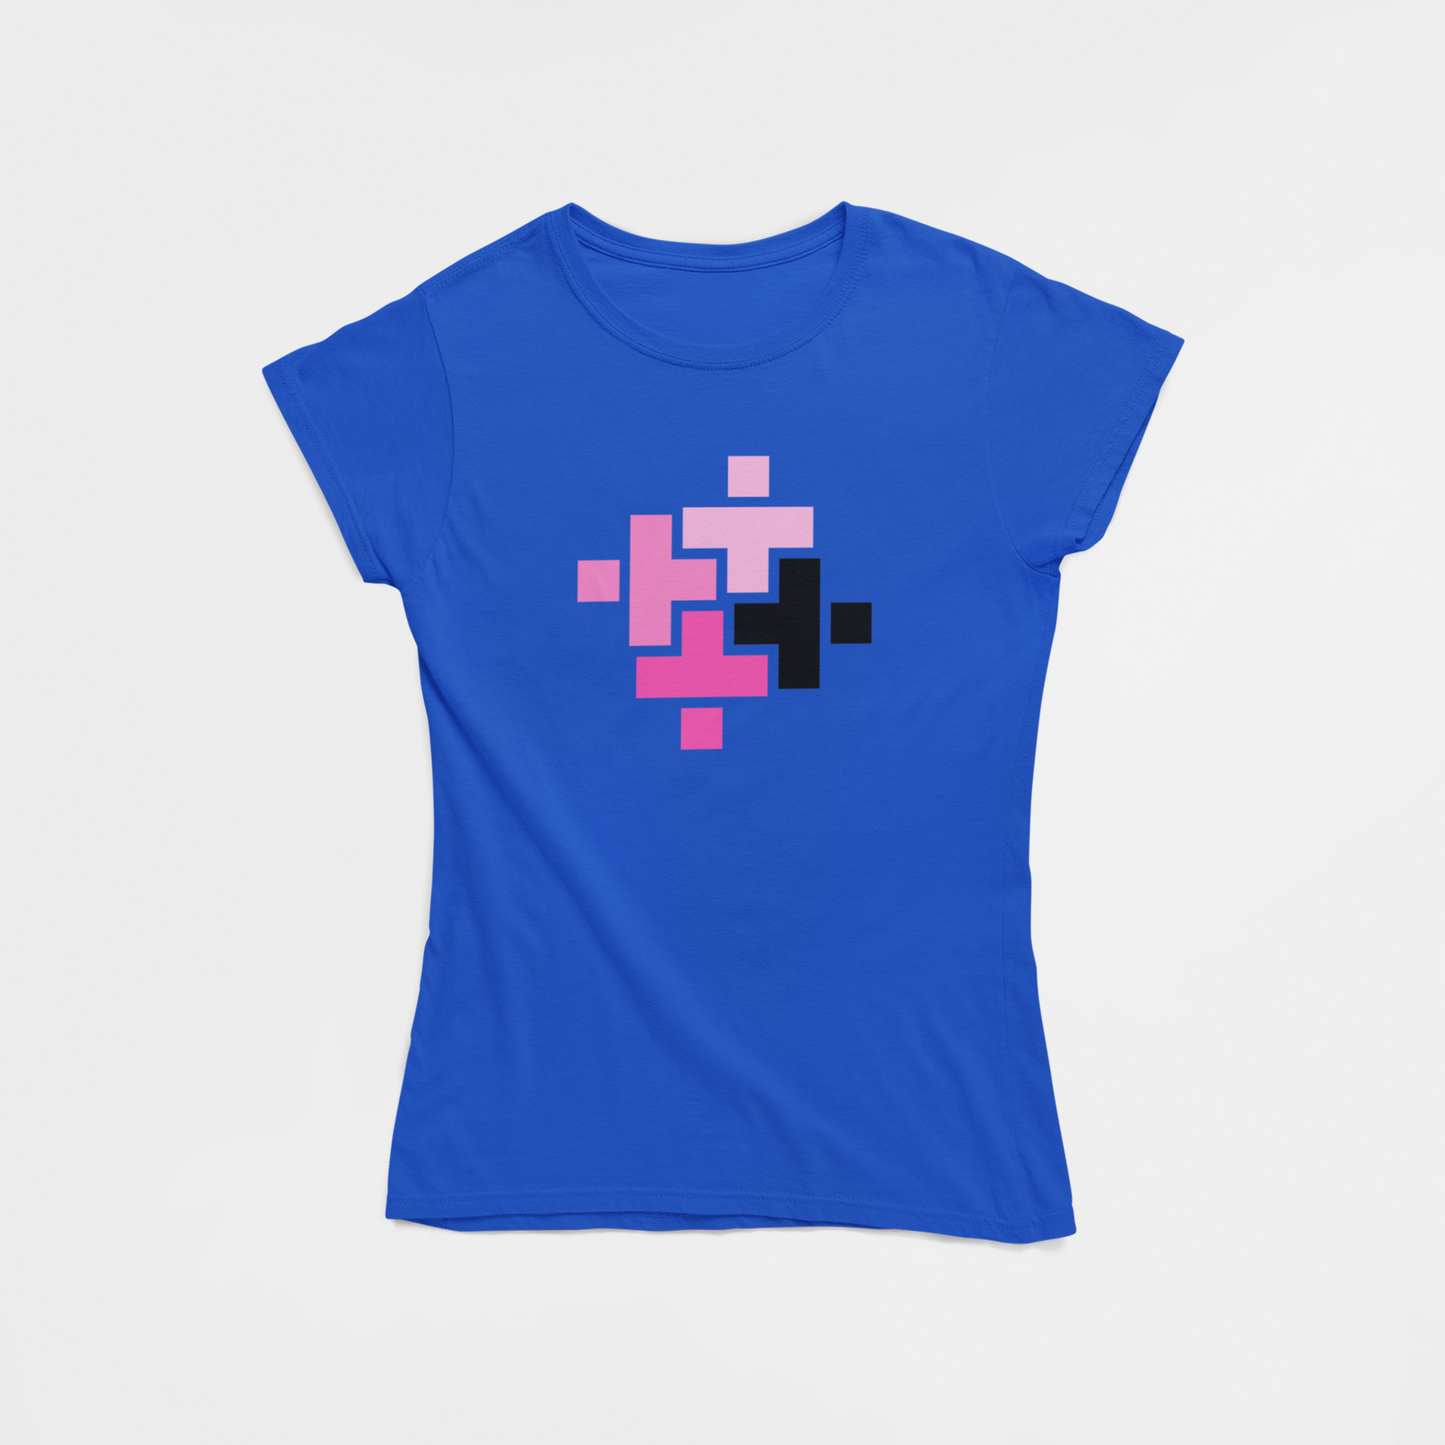 Abstract Art Royal Blue Round Neck T-Shirt for Women. 